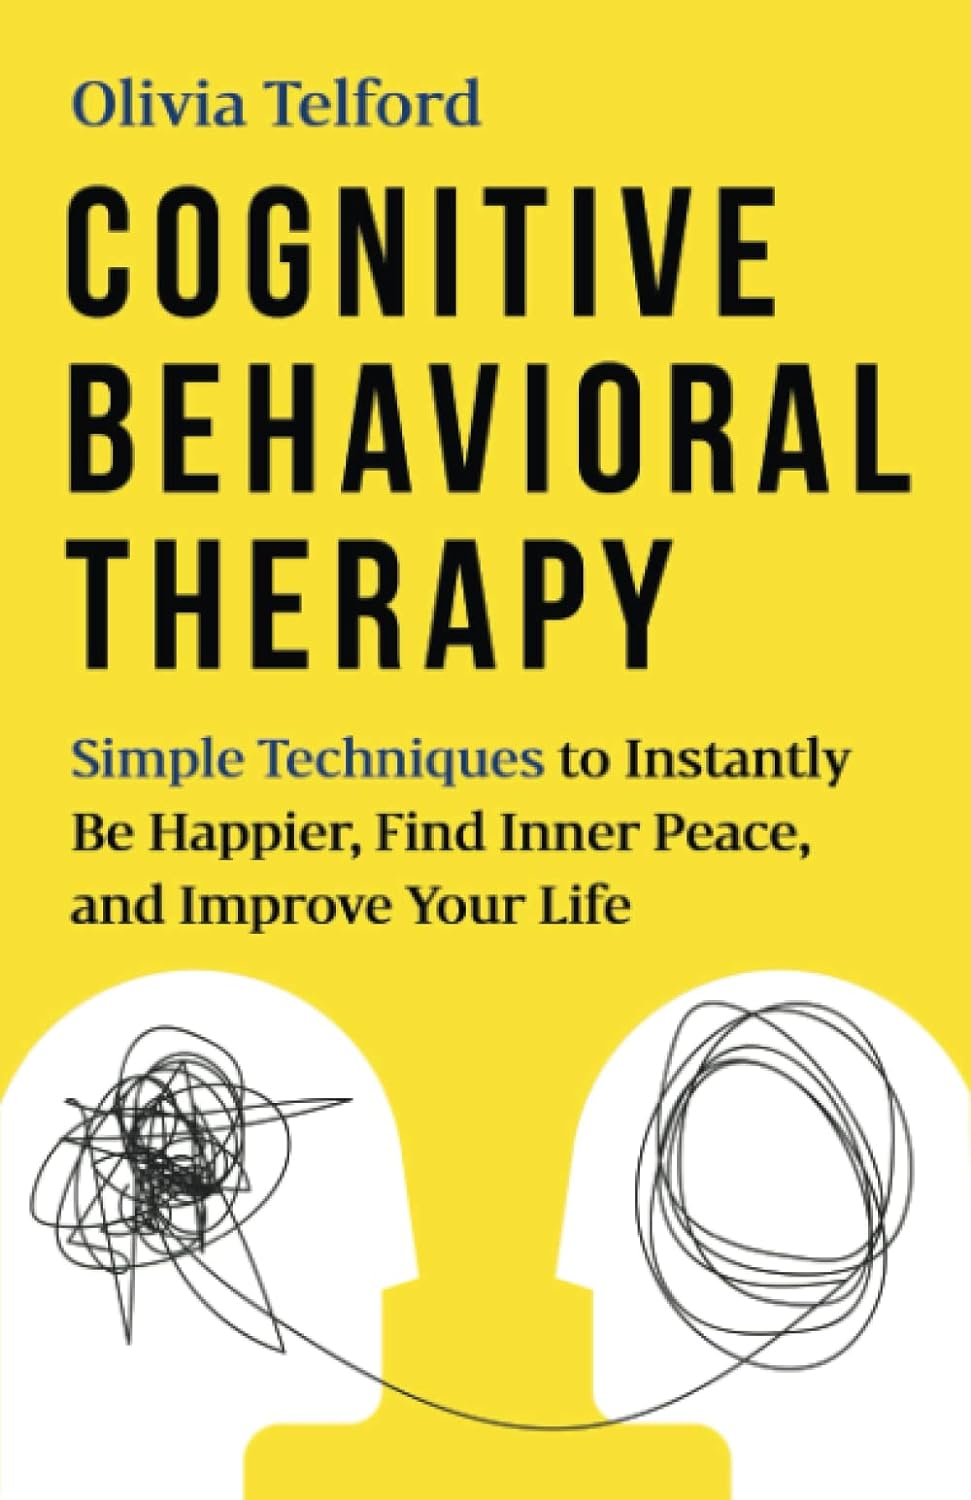 Cognitive Behavioral Therapy: Simple Techniques to Instantly Be Happier, Find Inner Peace, and Improve Your Life Paperback